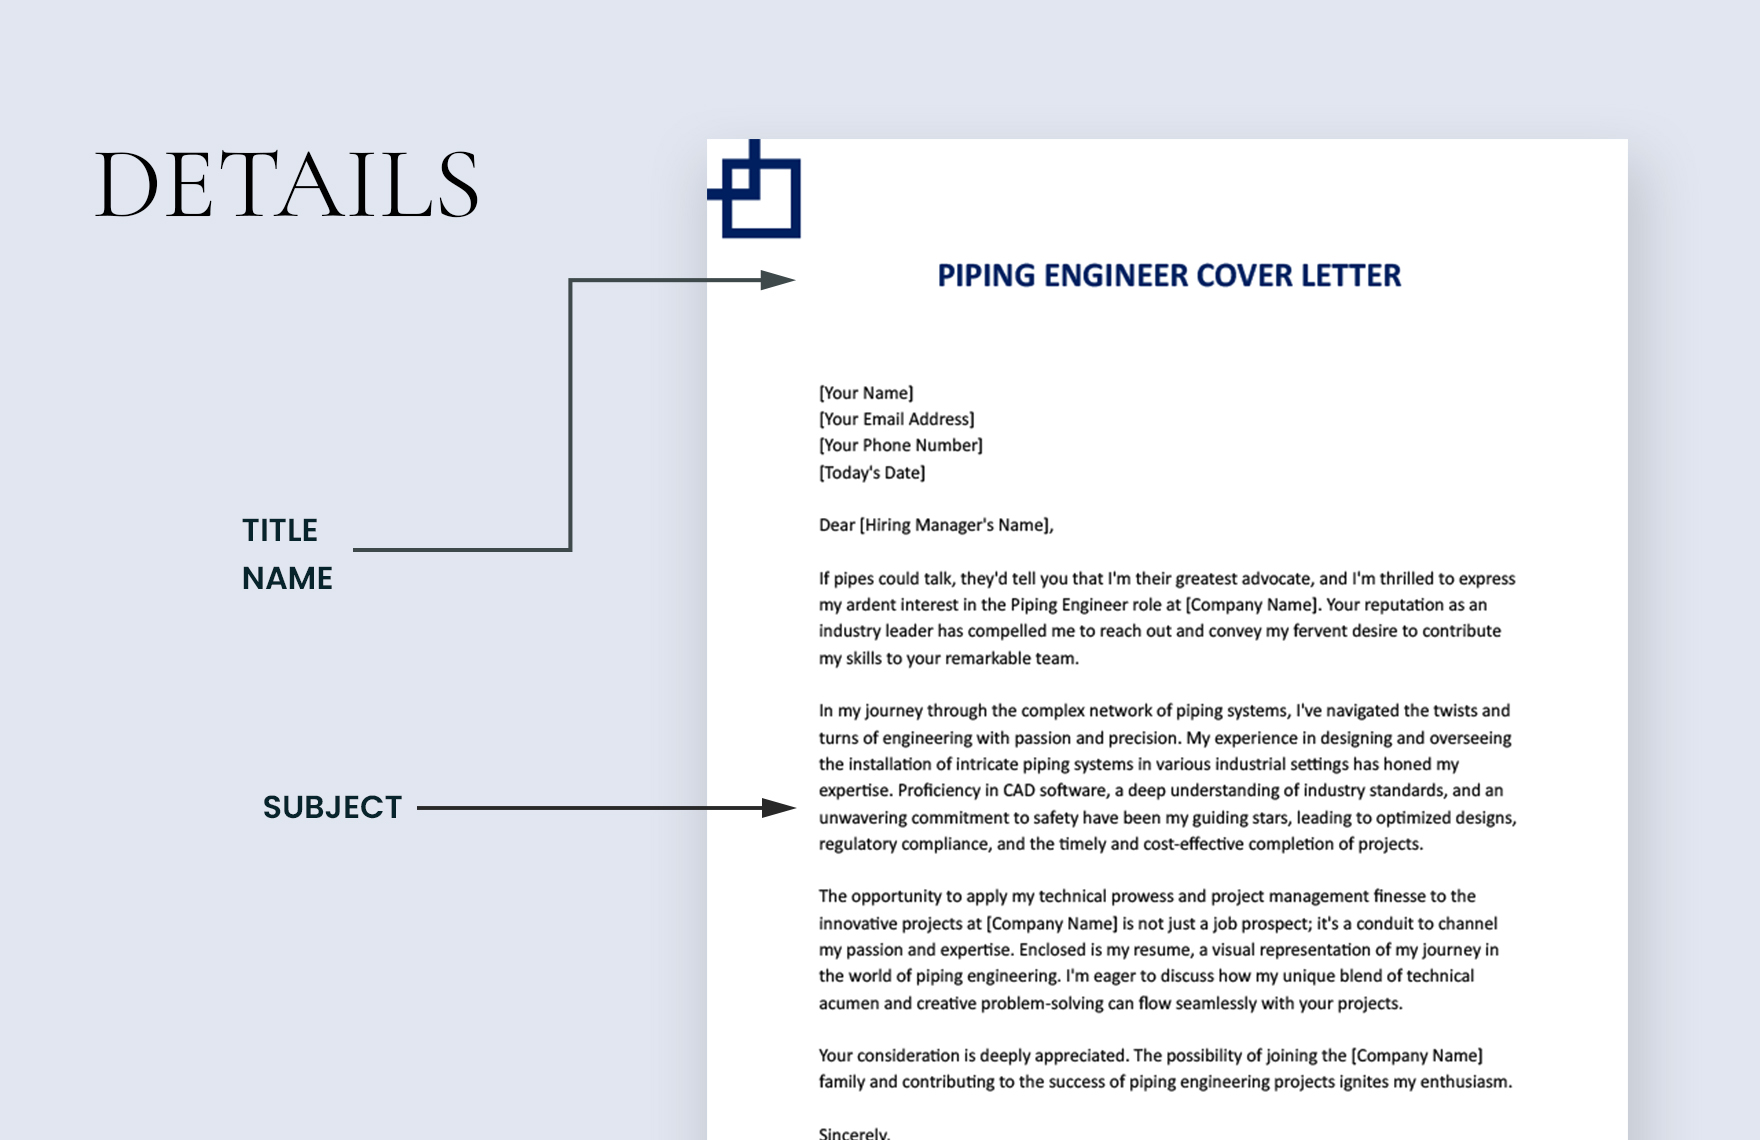 Piping Engineer Cover Letter